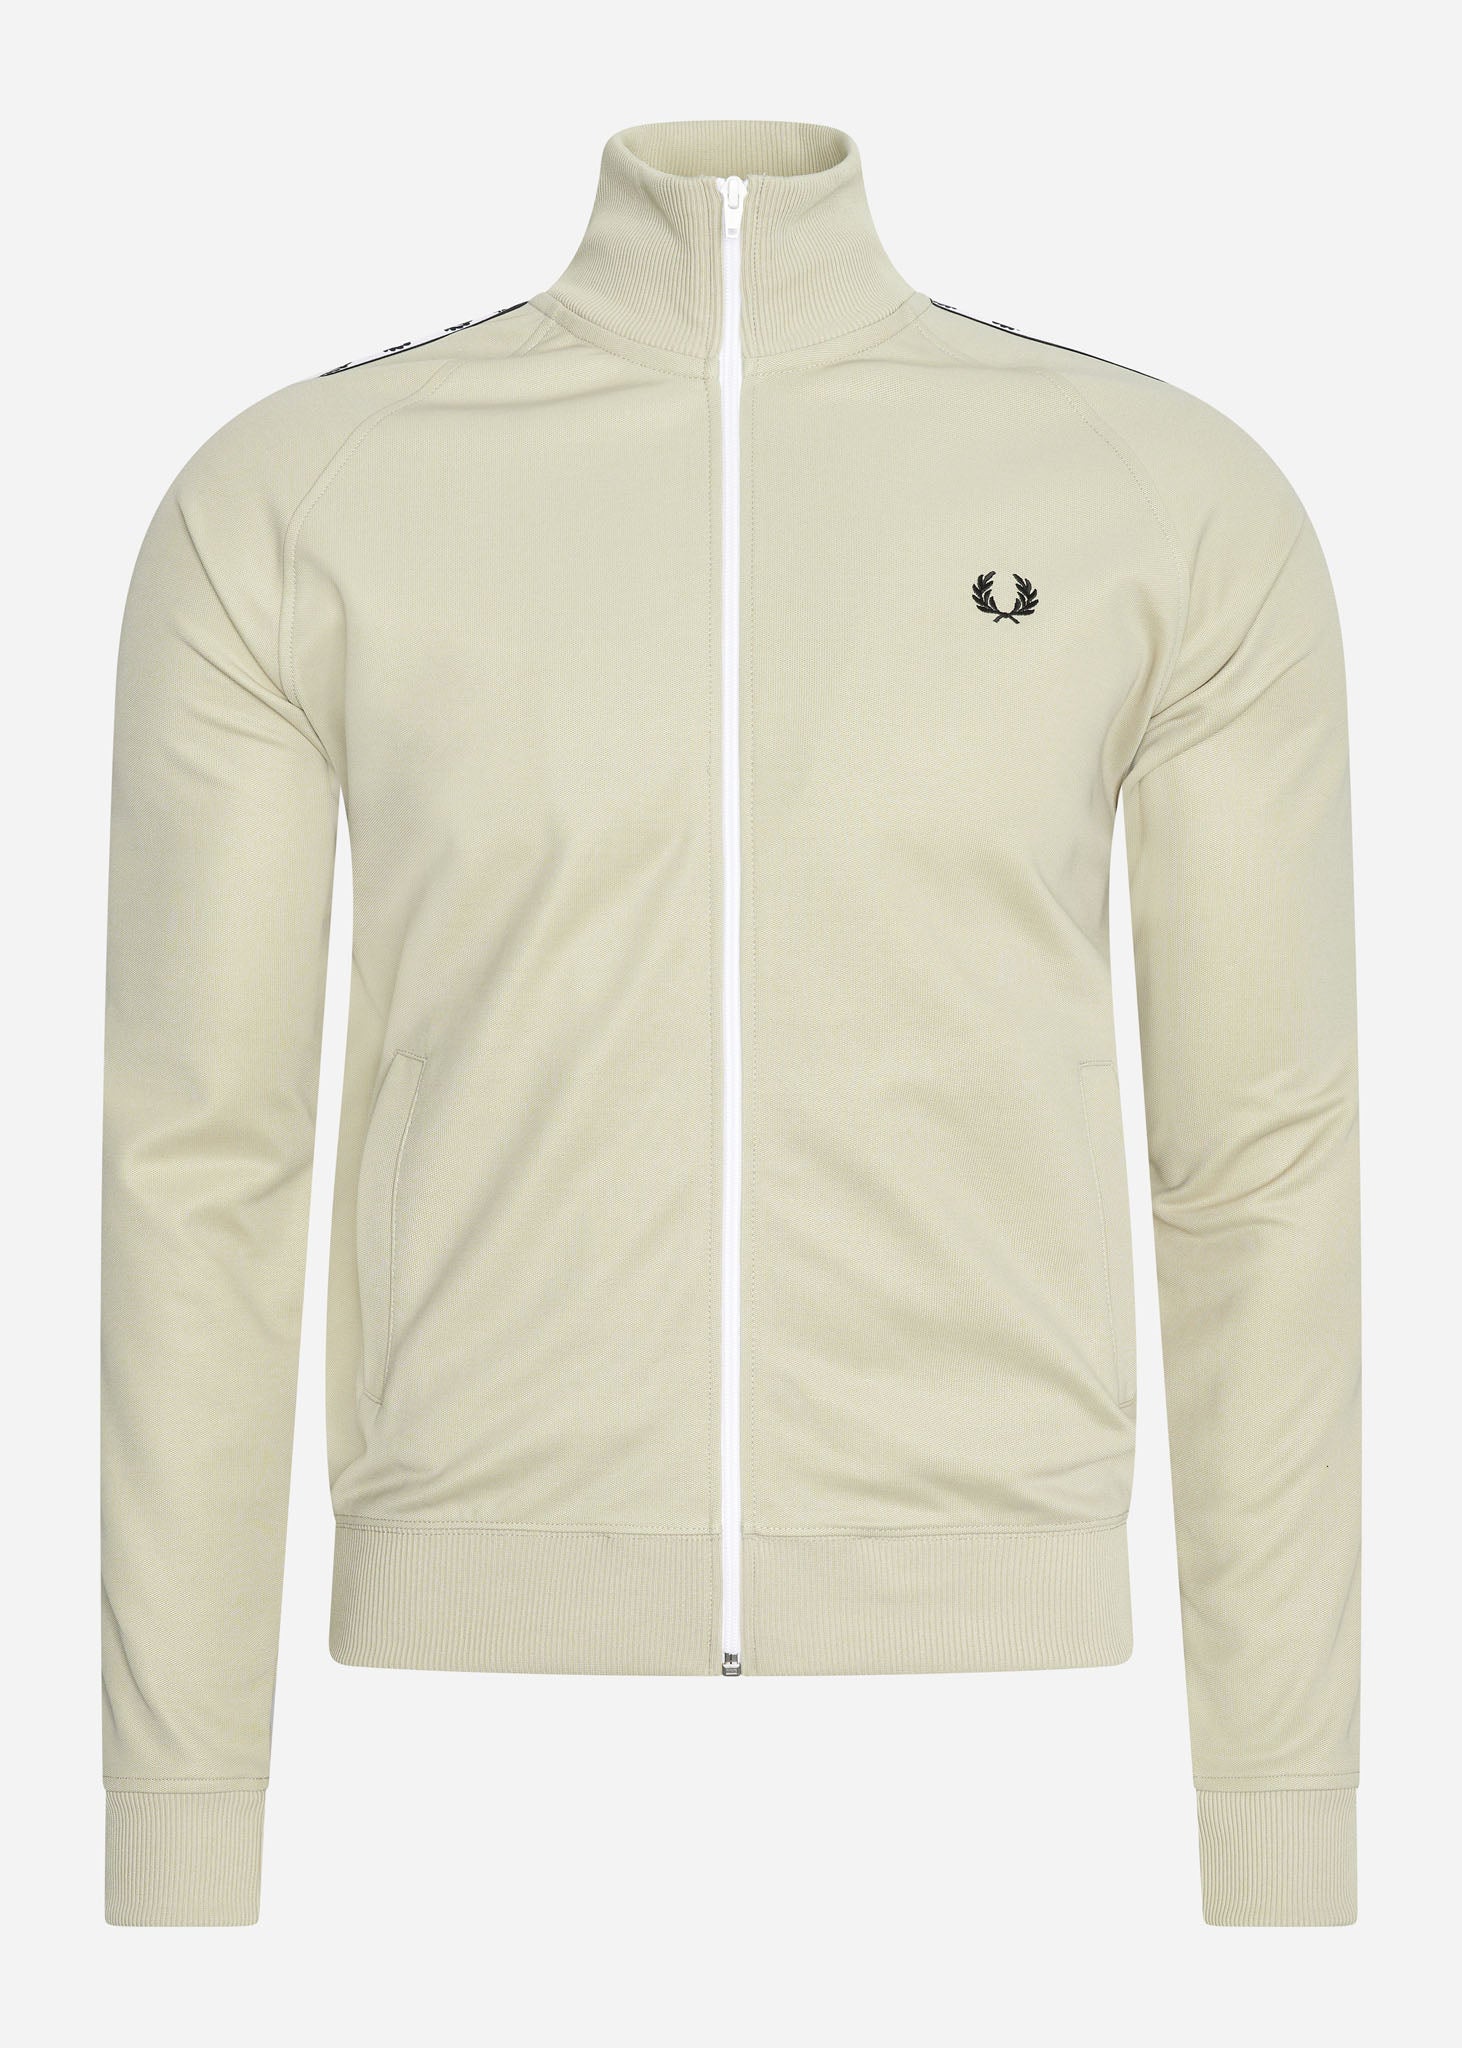 taped track jacket fred perry 